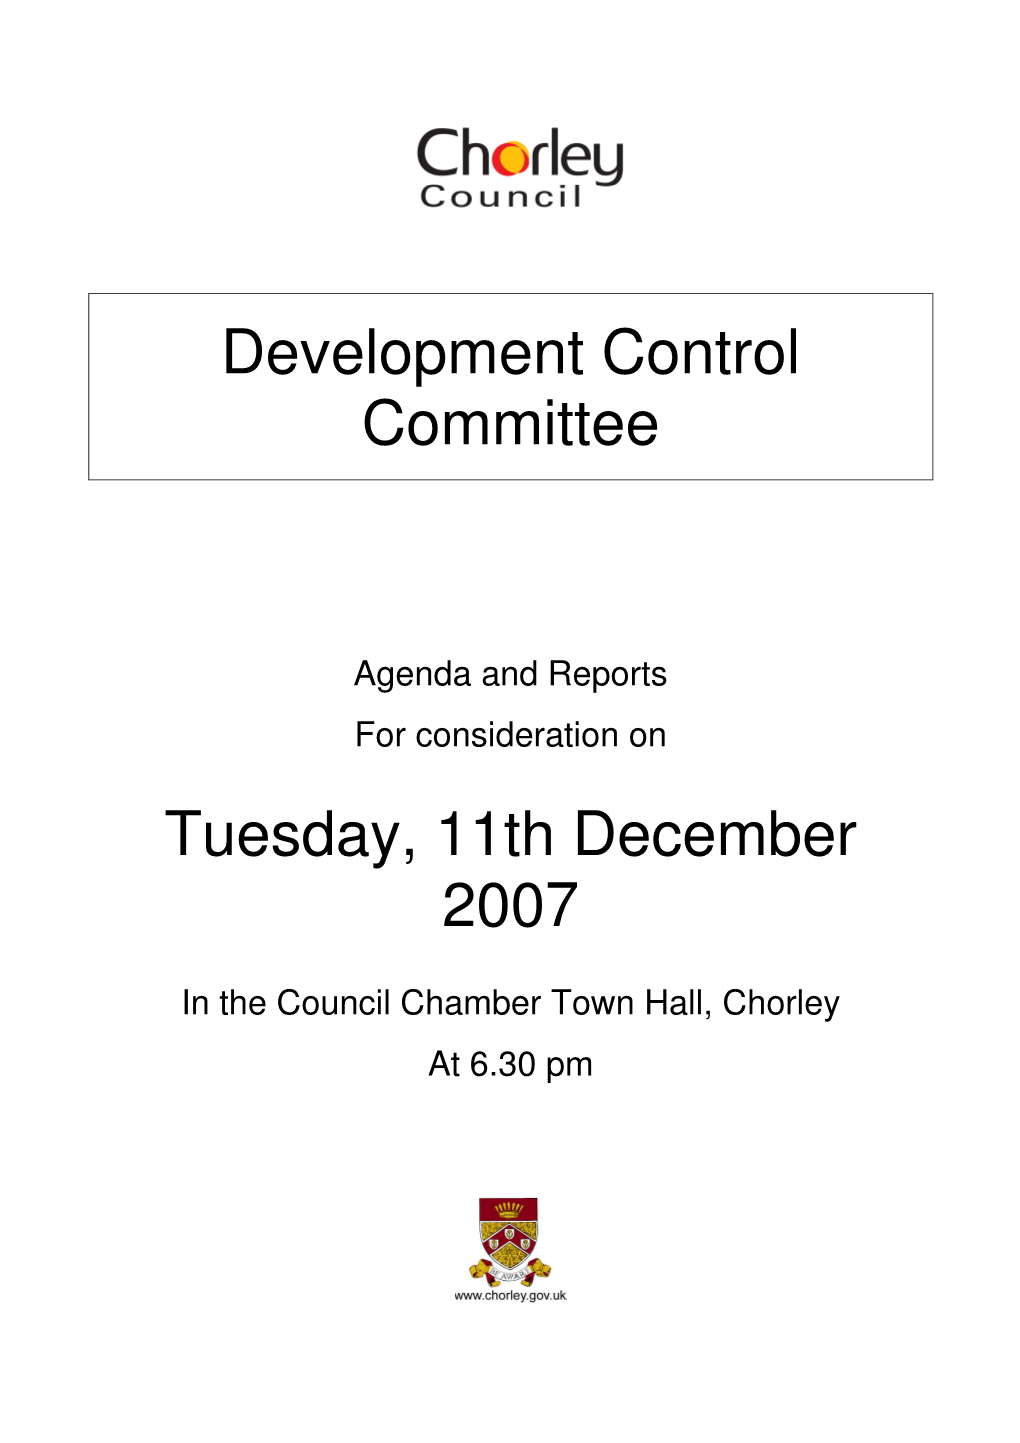 Development Control Committee Tuesday, 11Th December 2007